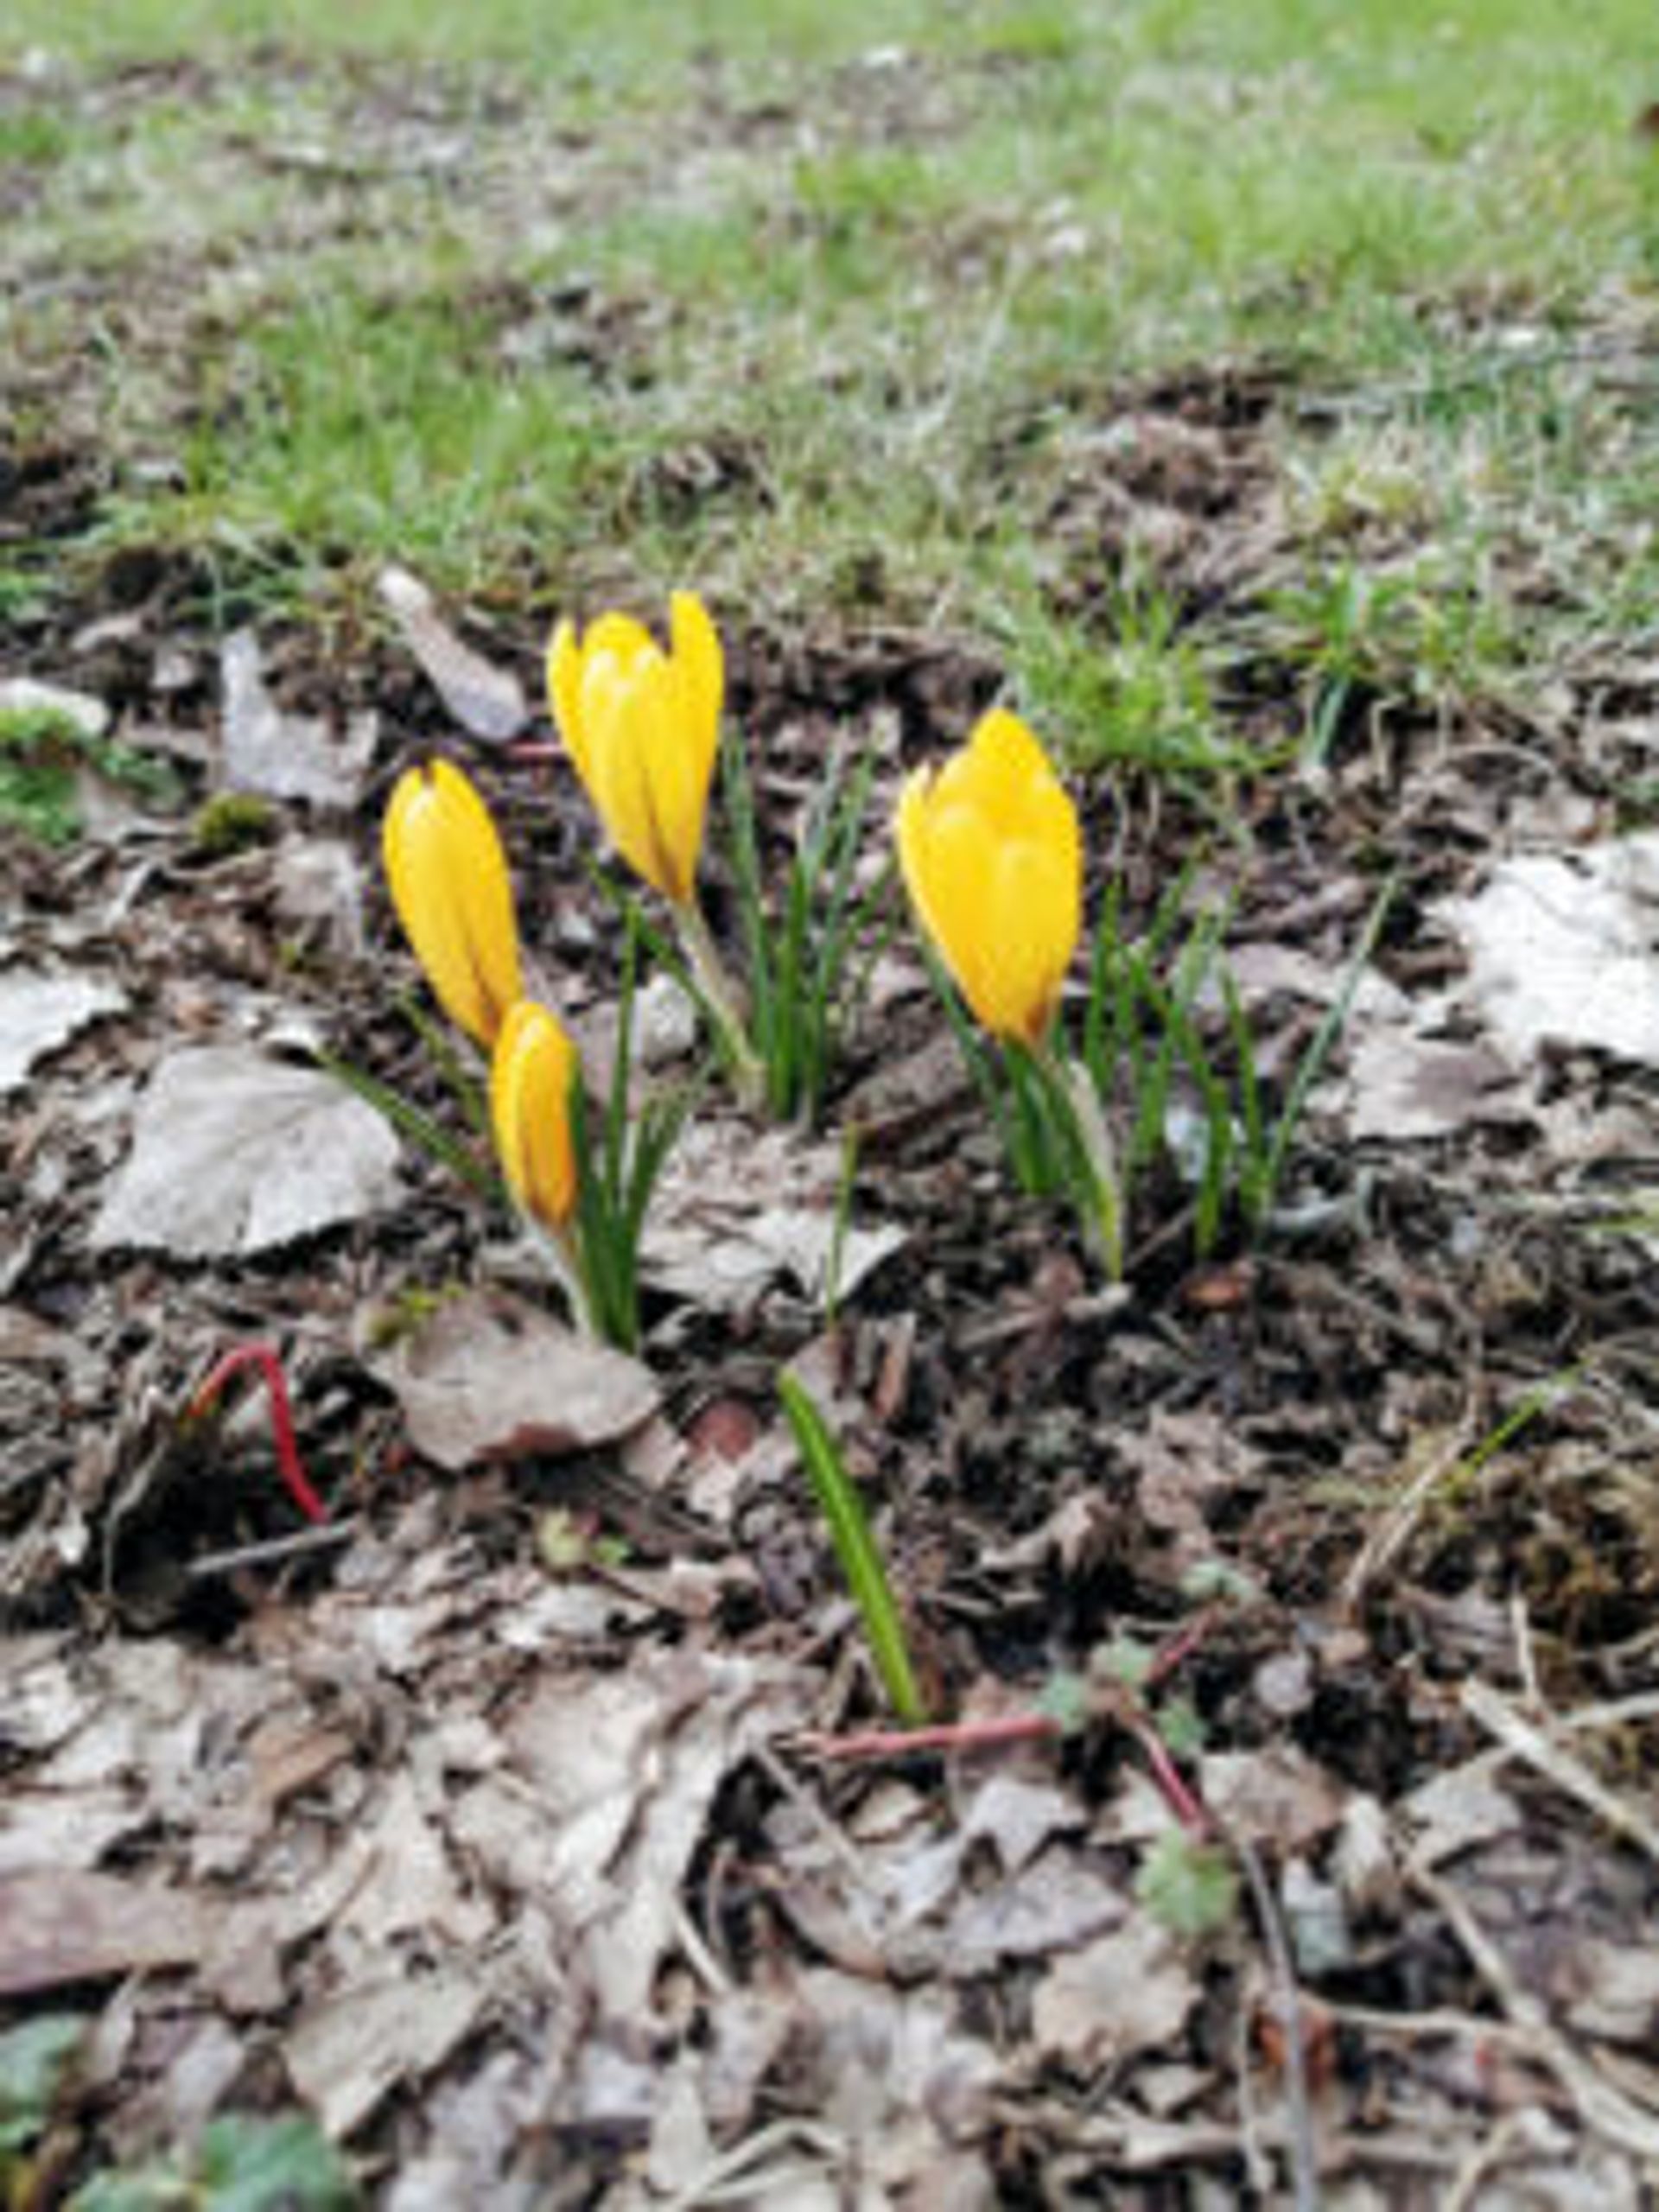 Yellow crocuses peeking out of the ground.